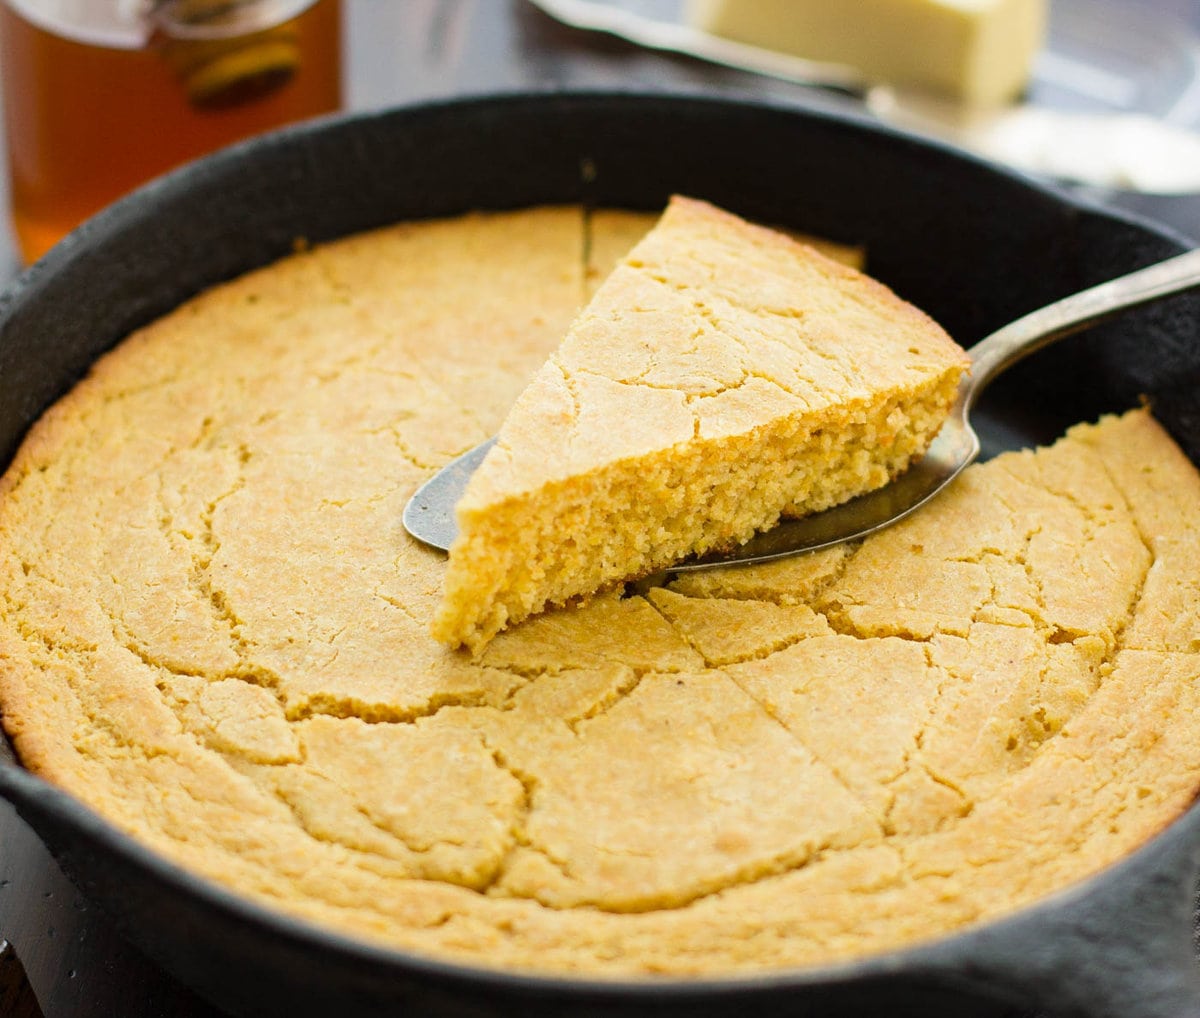 a wedge of cornbread has been cut out of the pan showing its lovely texture